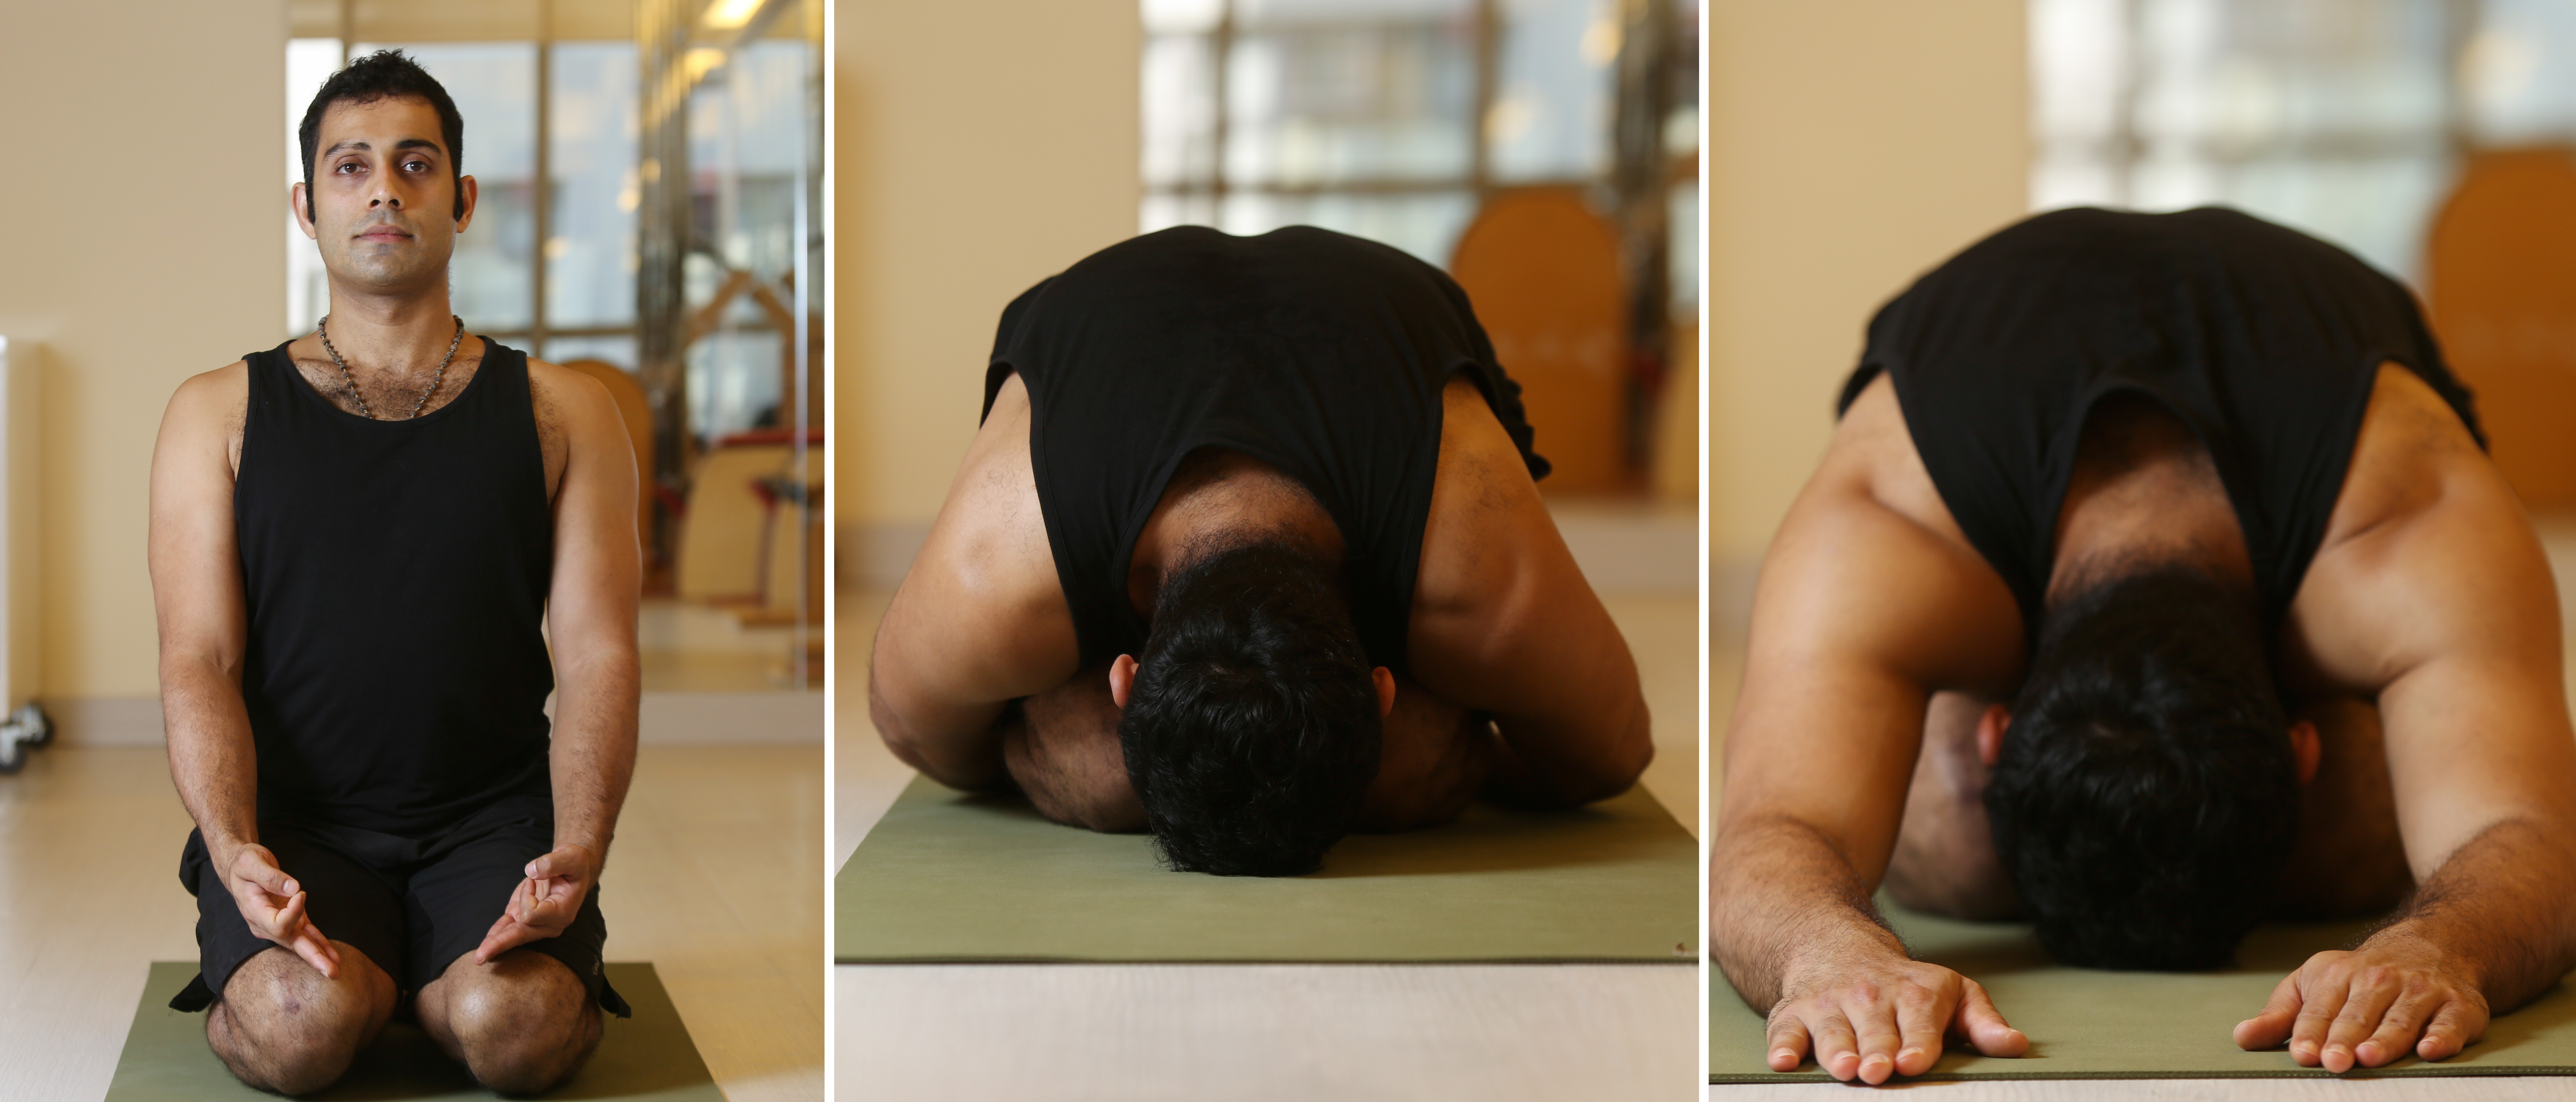 Sciatica is caused by pressure on the sciatic nerve from a bulging disc or tight buttock muscles. Yoga teacher and therapist Dilip Pillai shows how to stretch properly to alleviate symptoms of this painful, debilitating condition